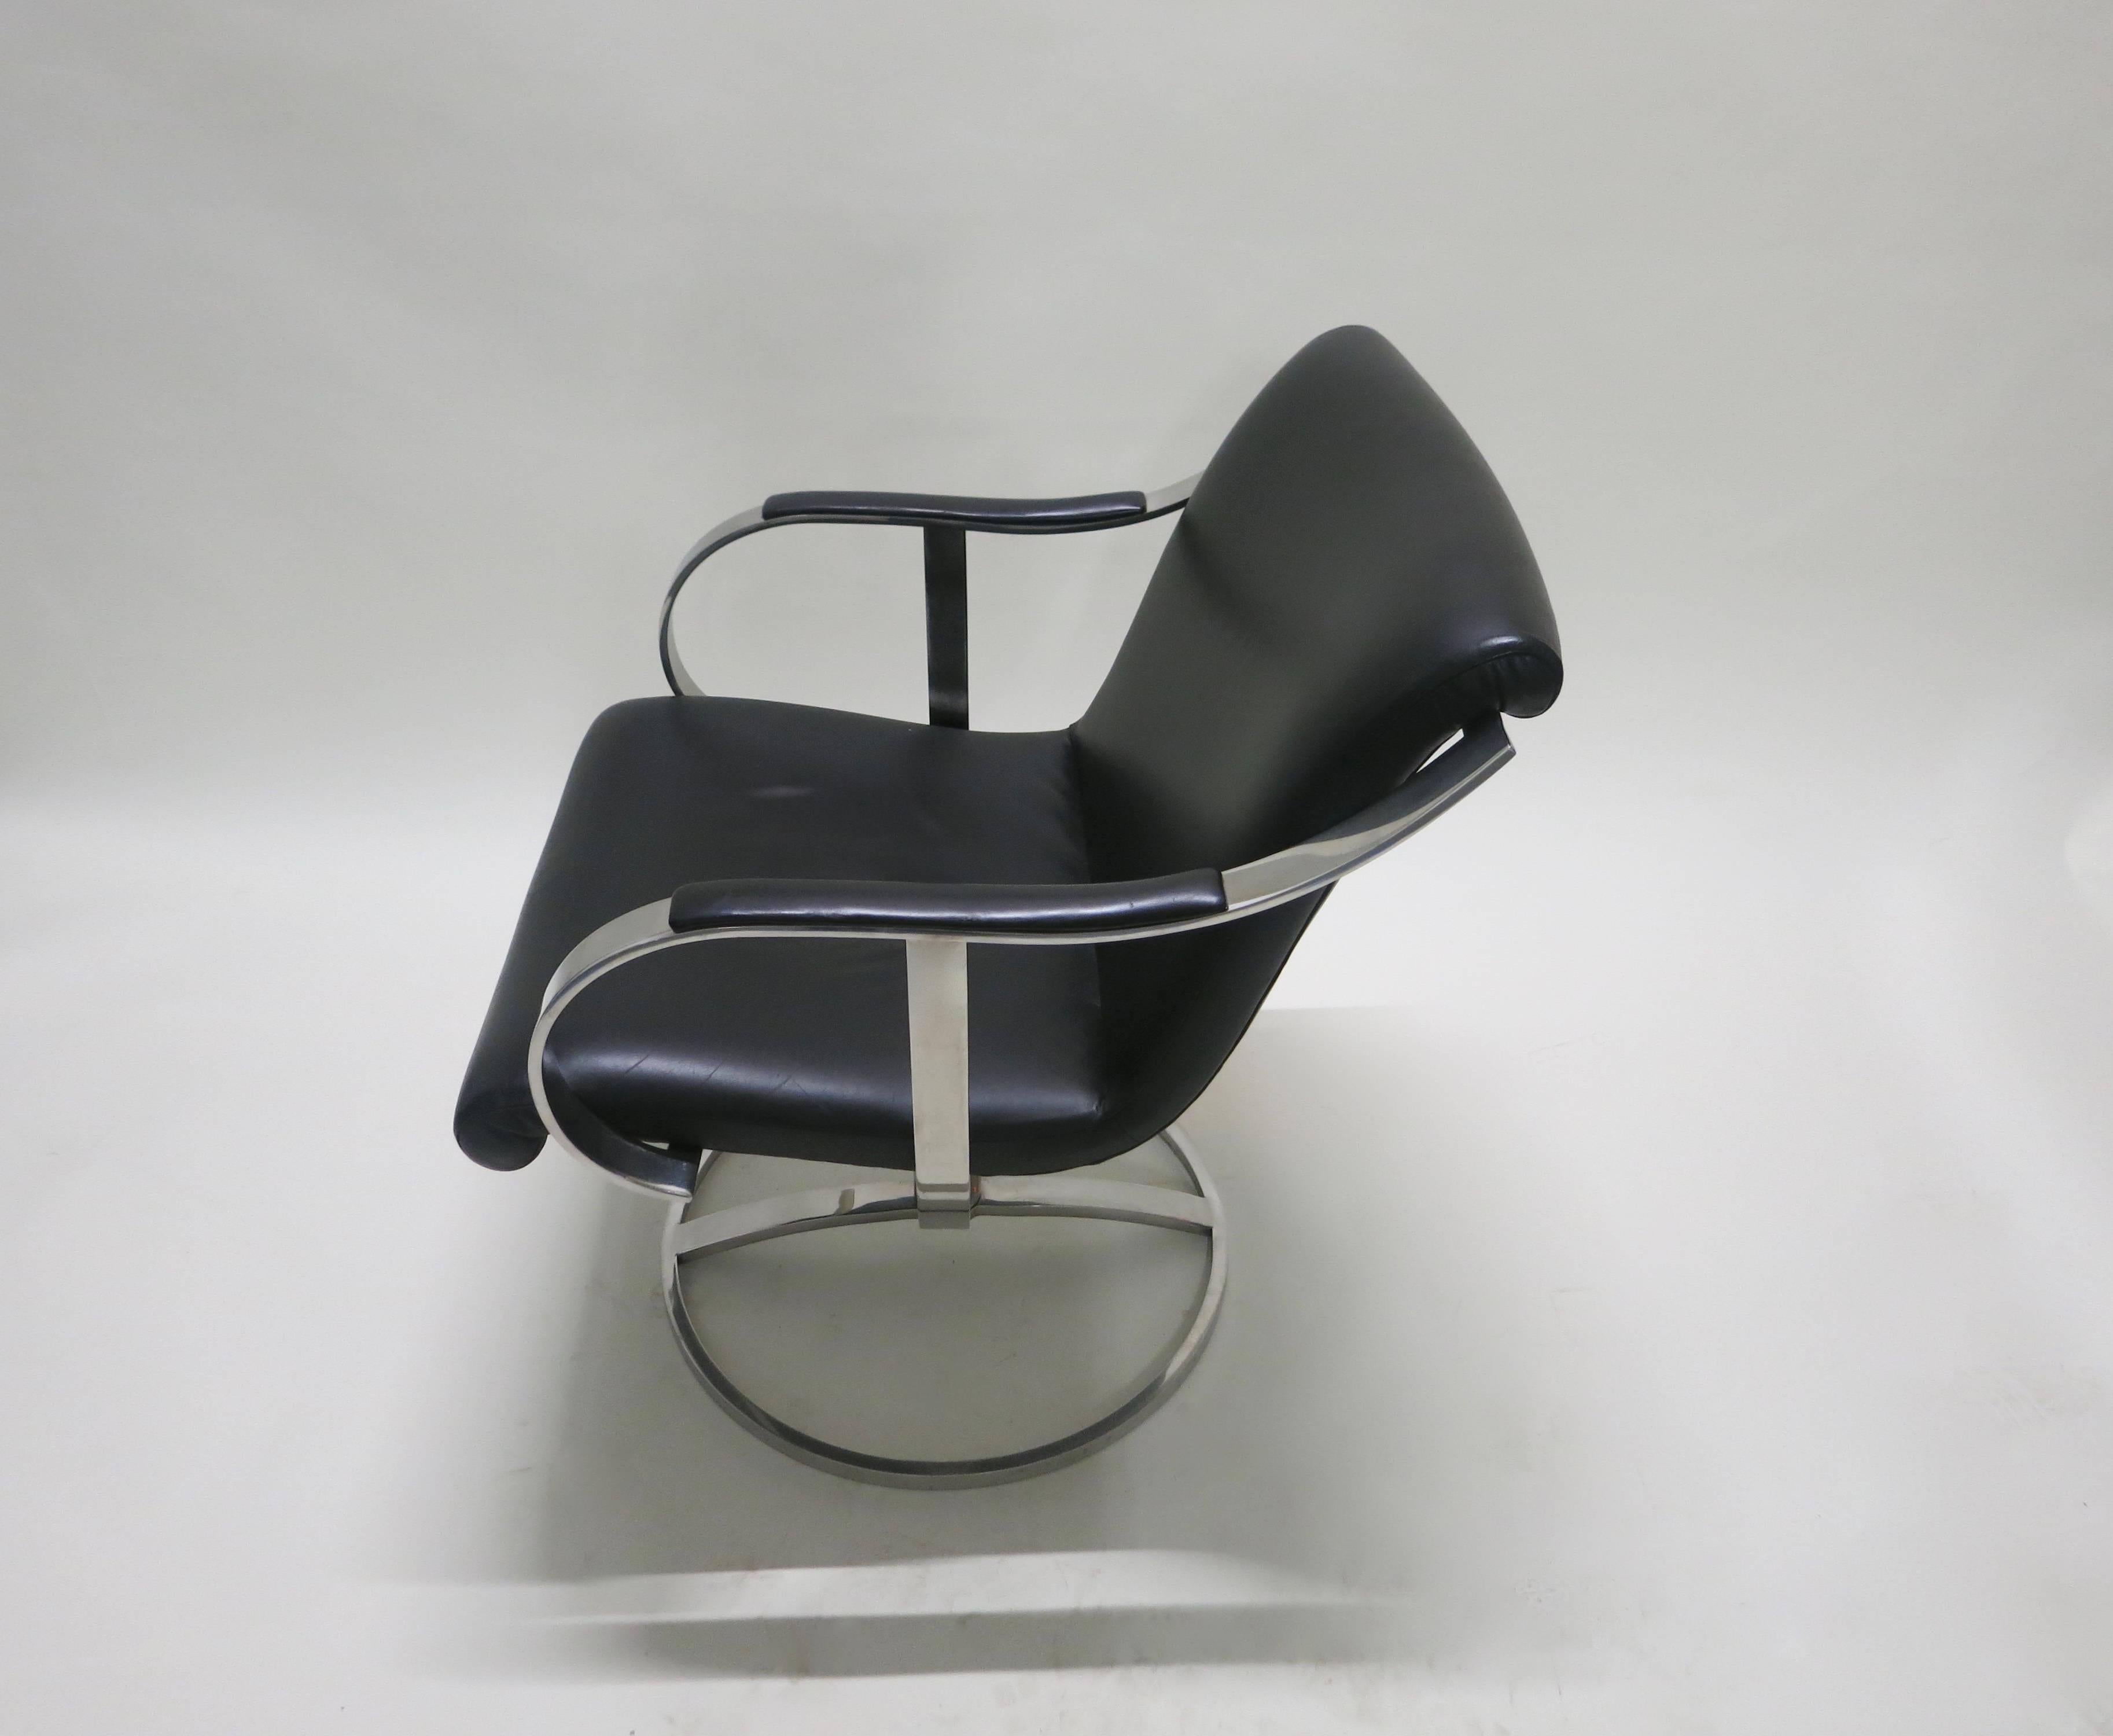 Late 20th Century Pair of Swivel Chairs by Gardner Leaver for Steelcase, circa 1965, American